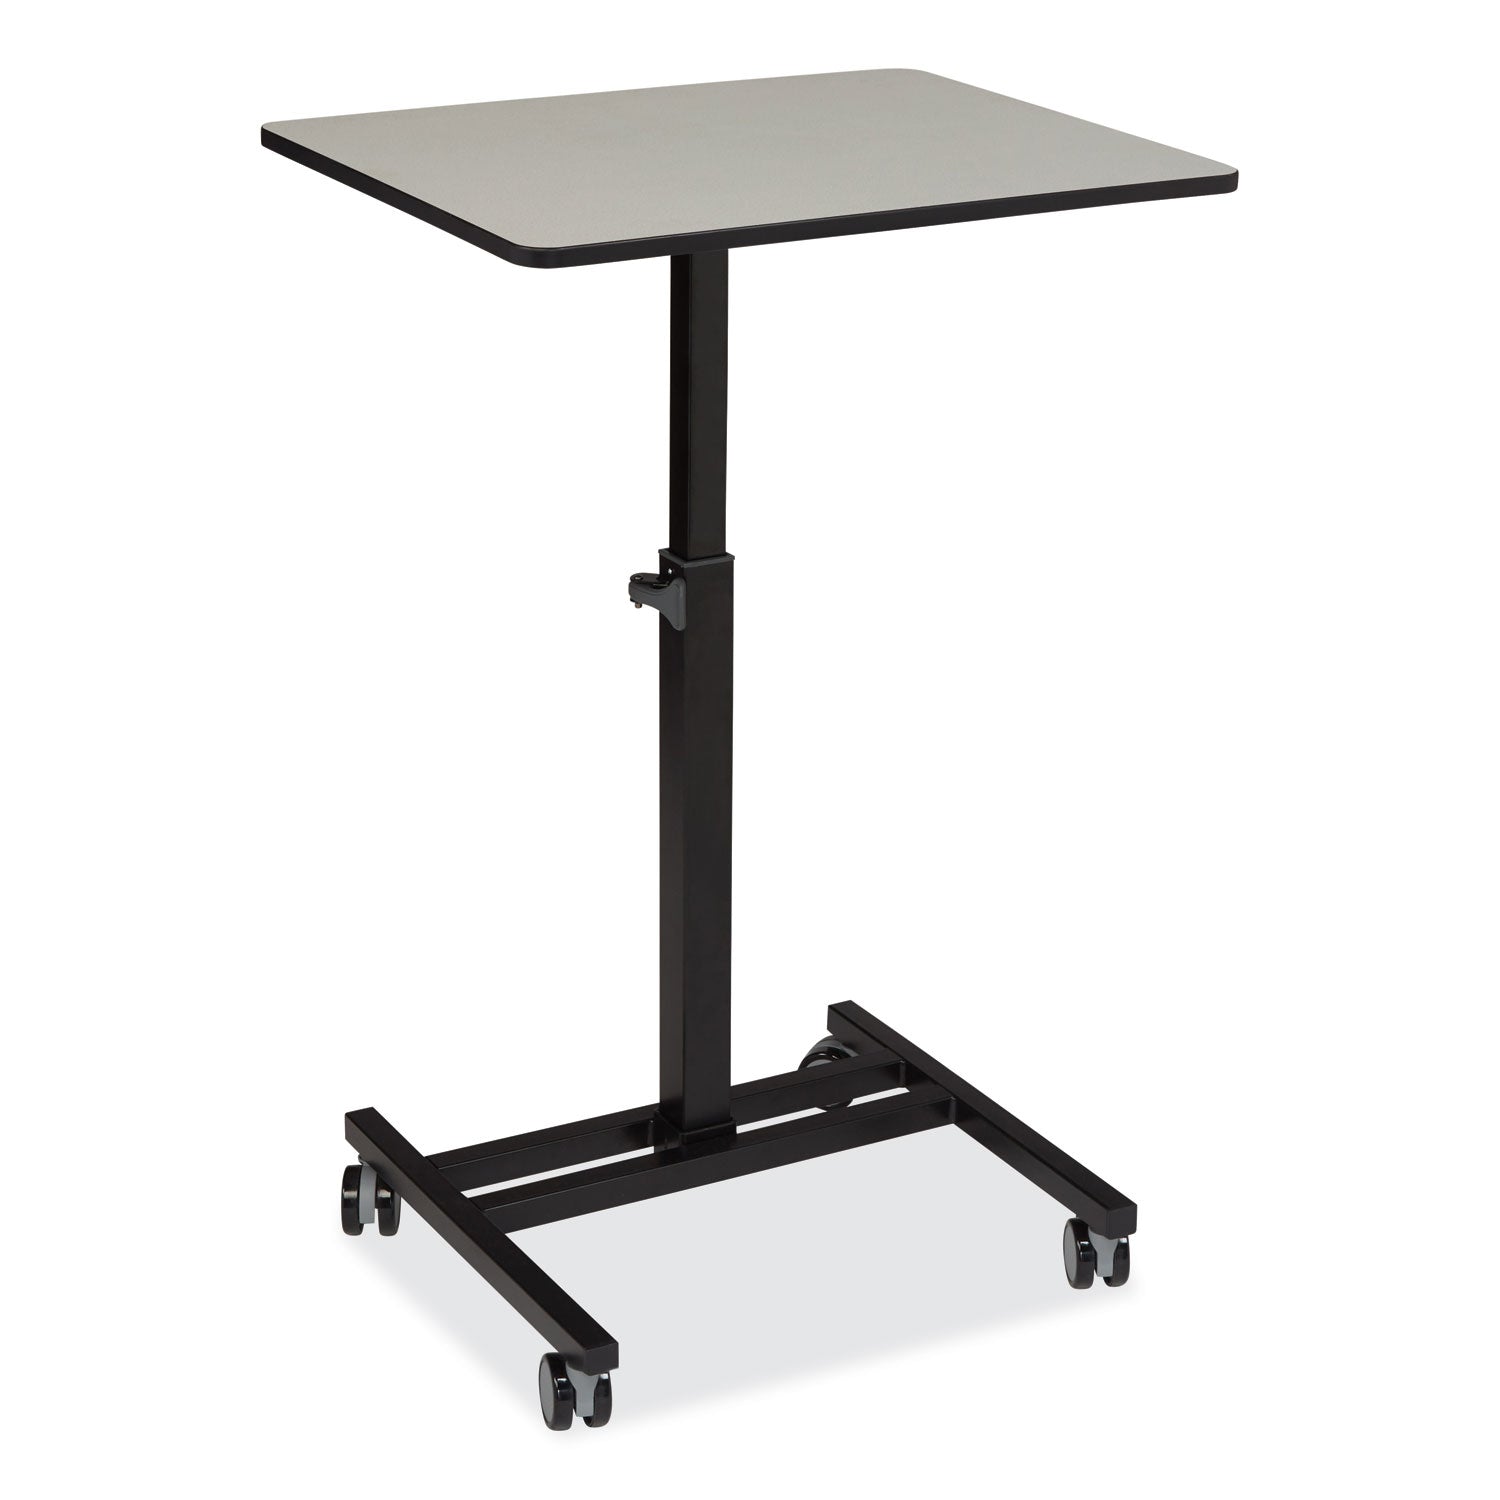 sit-stand-students-desk-2075-x-26-x-2775-to-445-gray-nebula-ships-in-1-3-business-days_npsedtc - 1